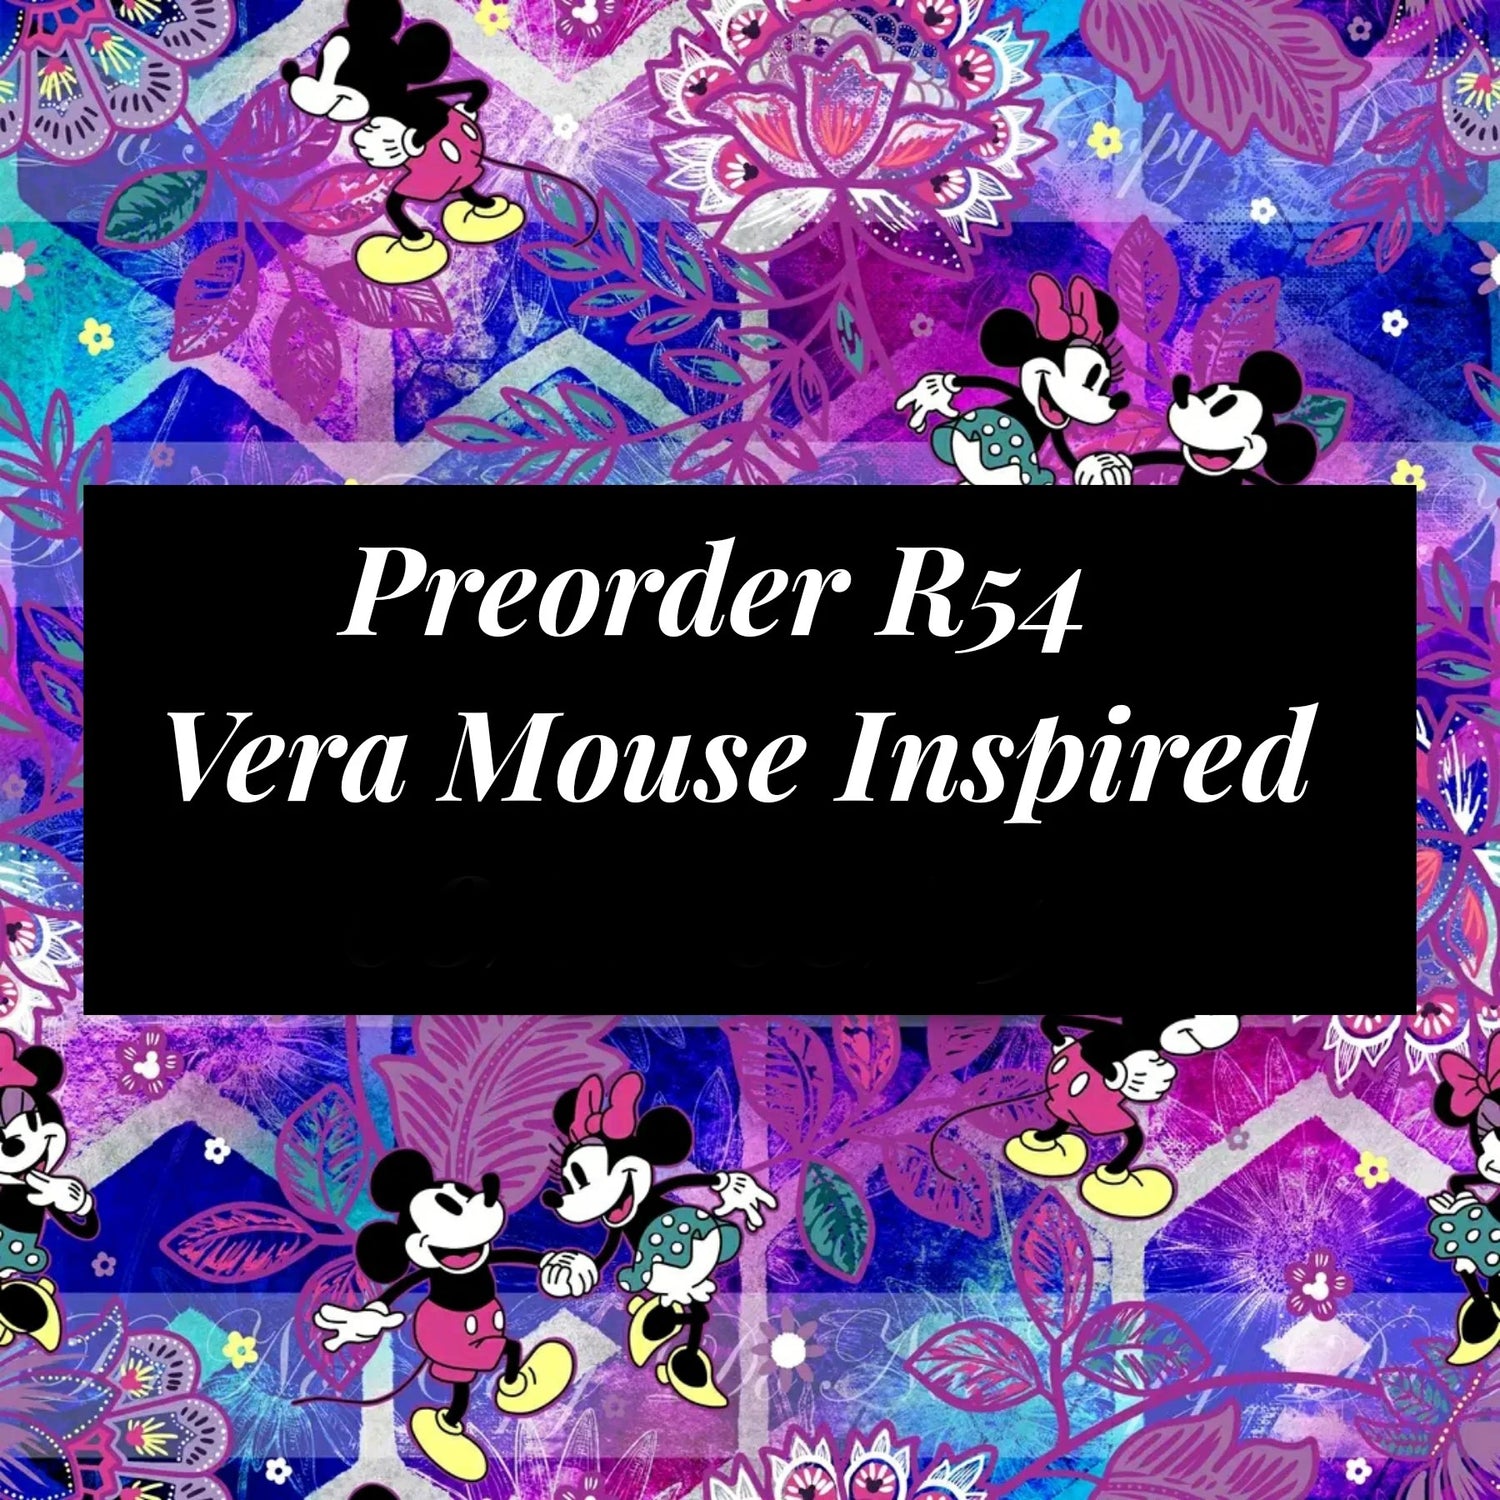 Preorder r54 - Vera Mouse Inspired